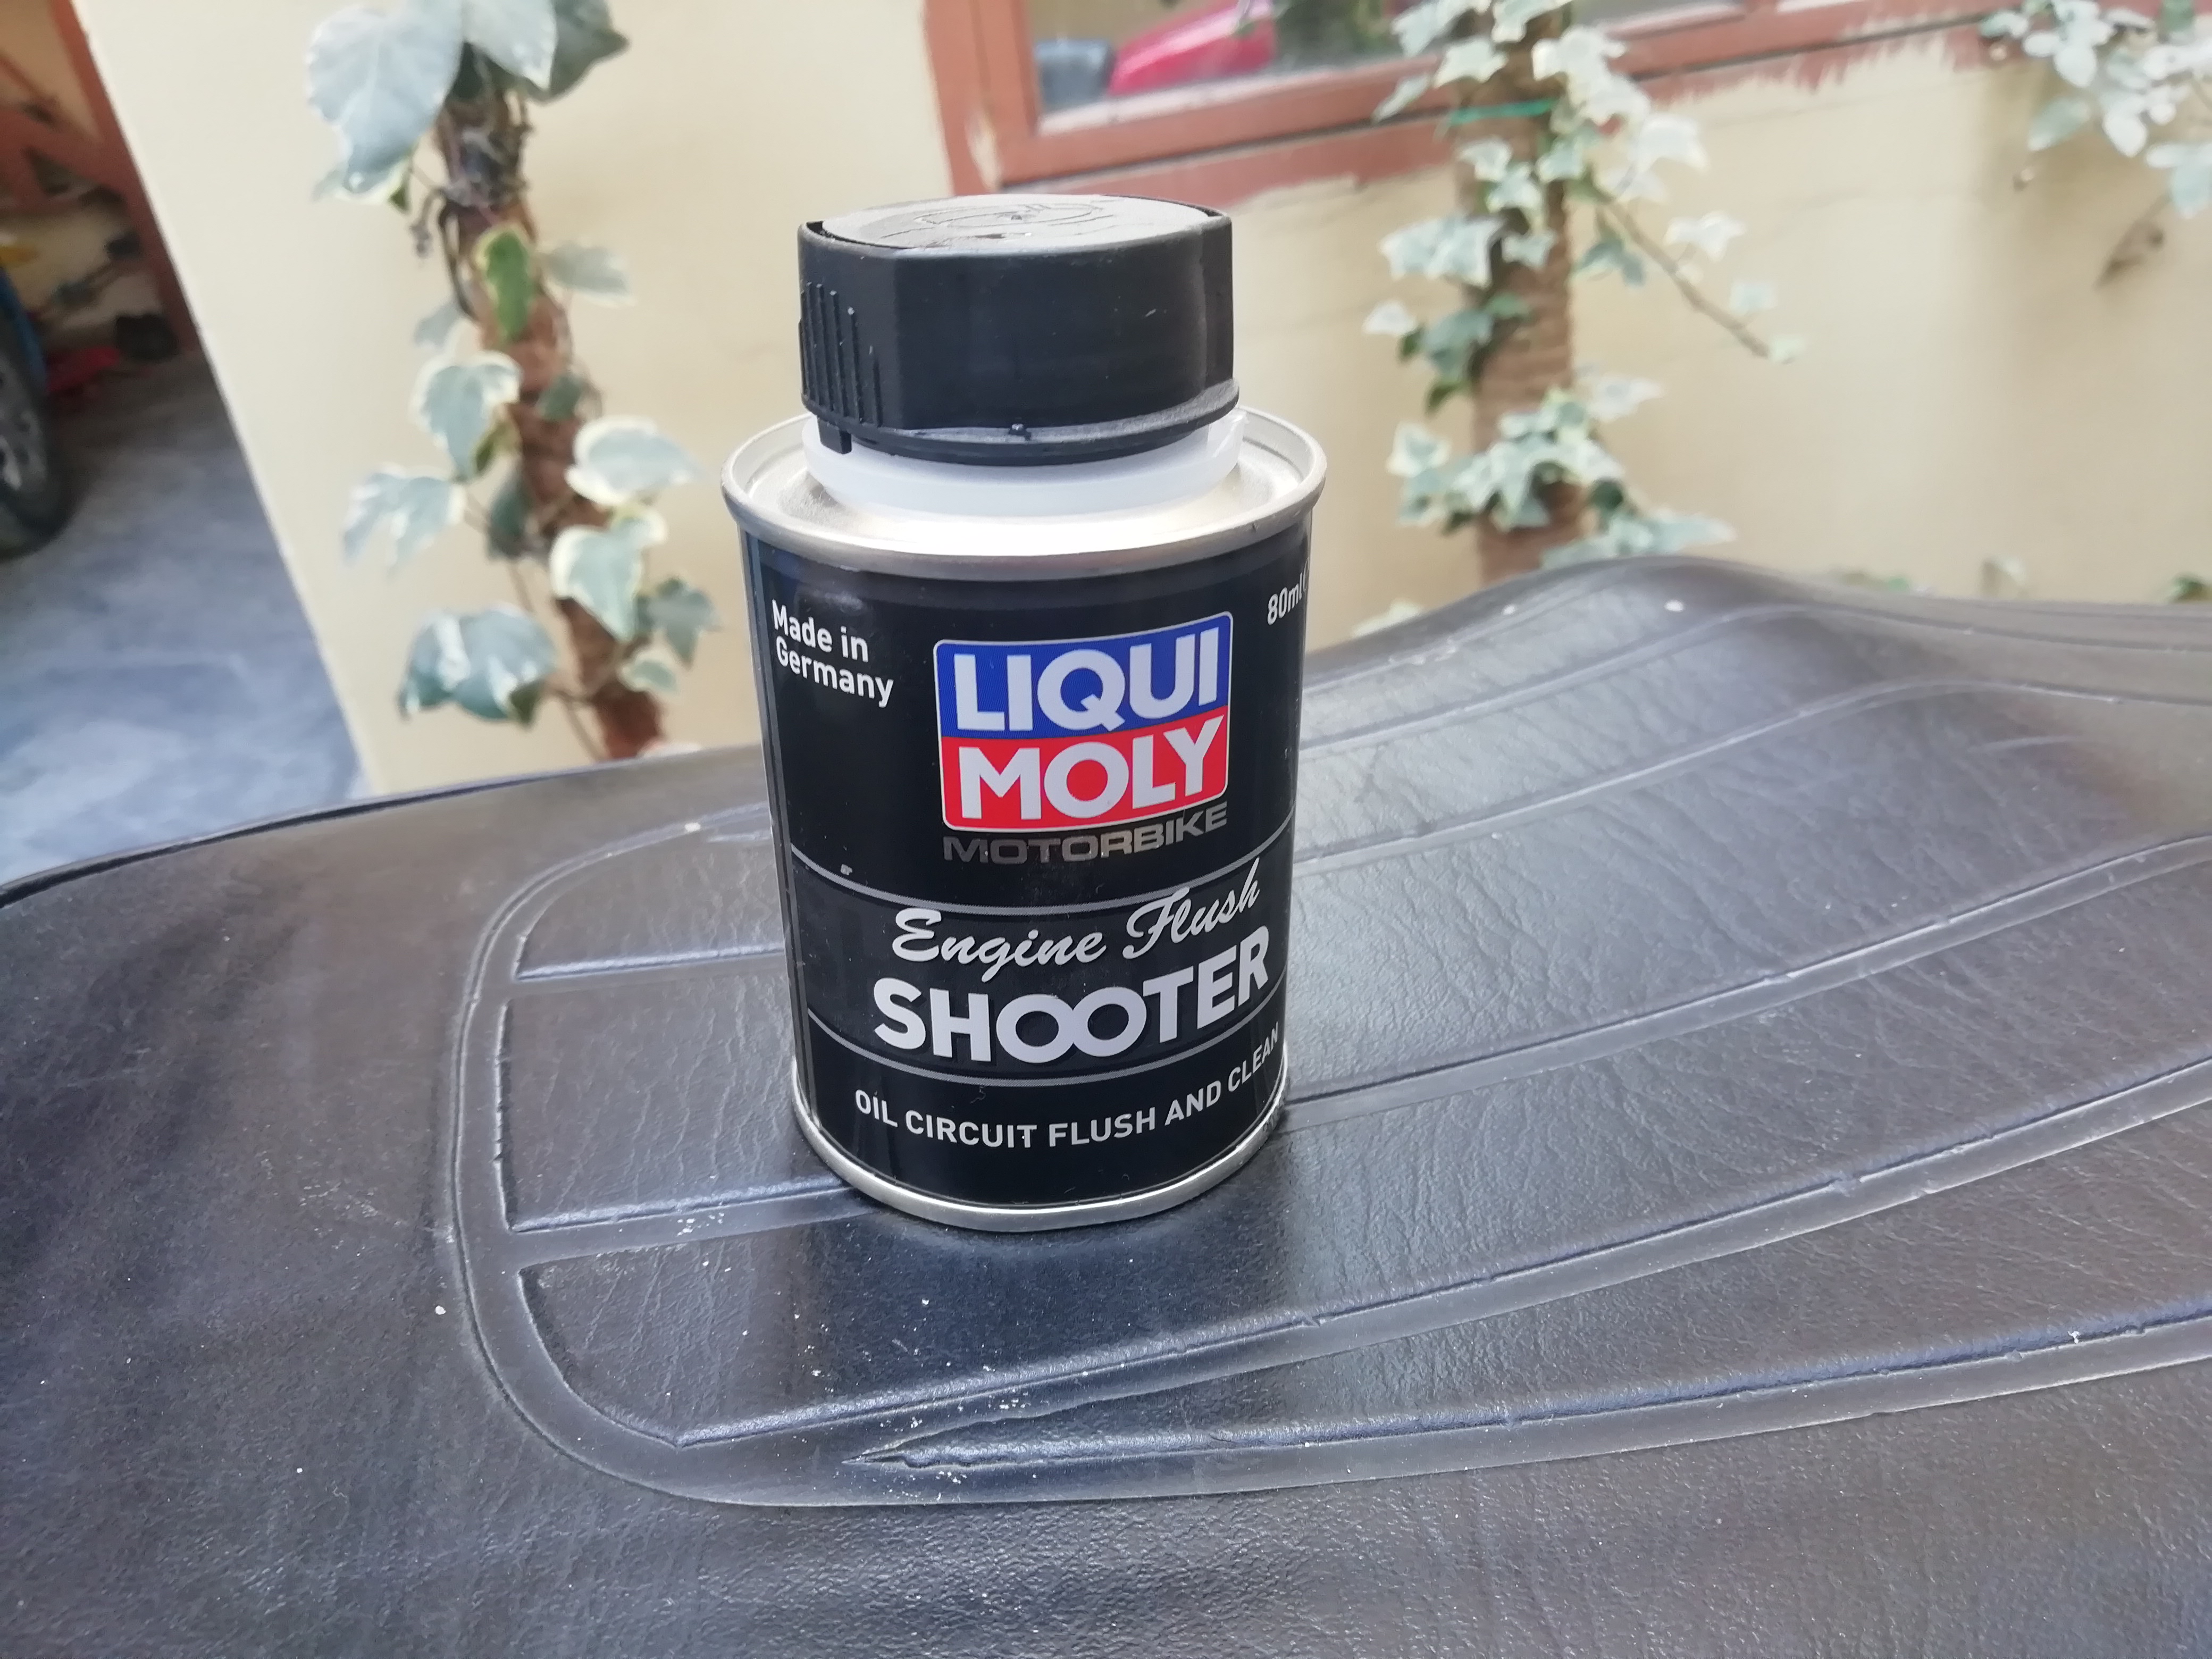 LIQUIMOLY MOTORLIQUIMOLY MOTORBIKE ENGINE FLUSH SHOOTER FOR ALL BIKE ENGINES  CLEANS ENGINE FROM CARBON SLUDGE DIRT ENHANCE OVER ALL ENGINE PERFORMANCE  BIKE ENGINE FLUSH SHOOTER FOR ALL BIKE ENGINES: Buy Online at